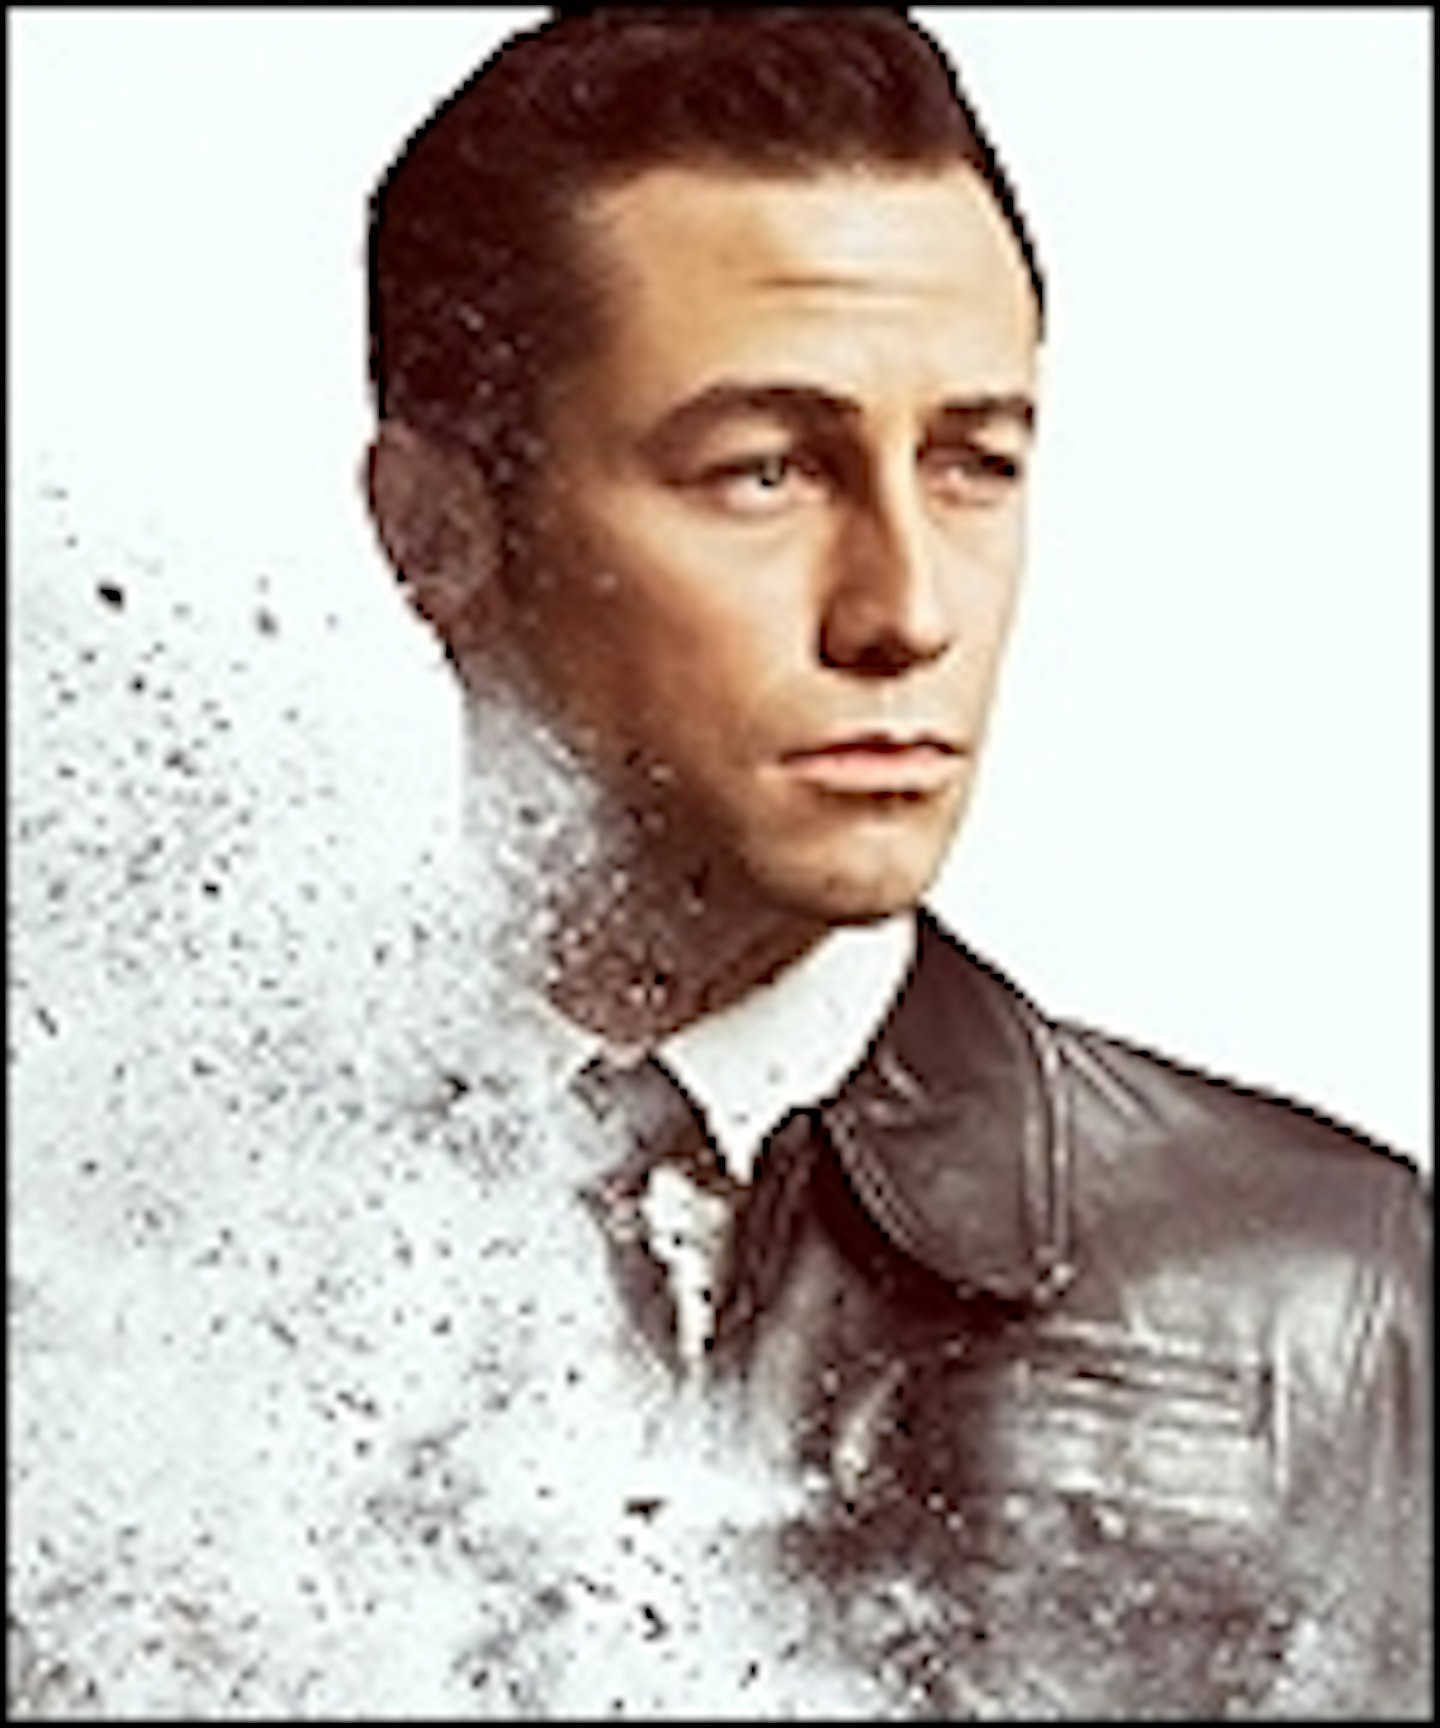 Latest Looper Trailer Jumps In